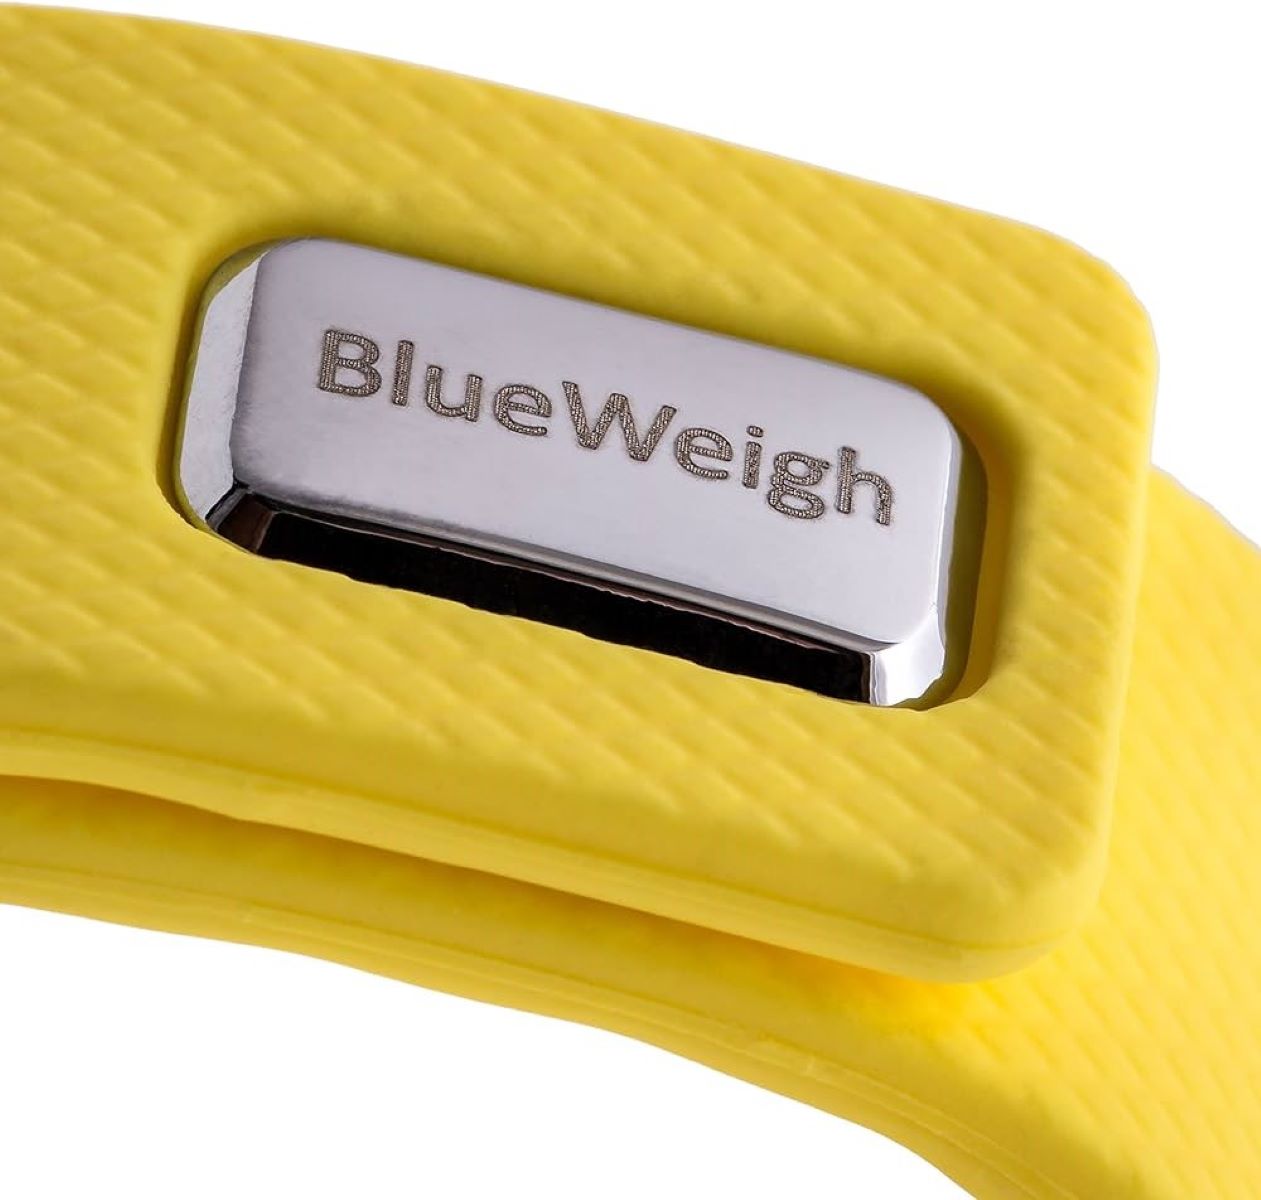 BlueWeigh Fitness Tracker: How To Buckle